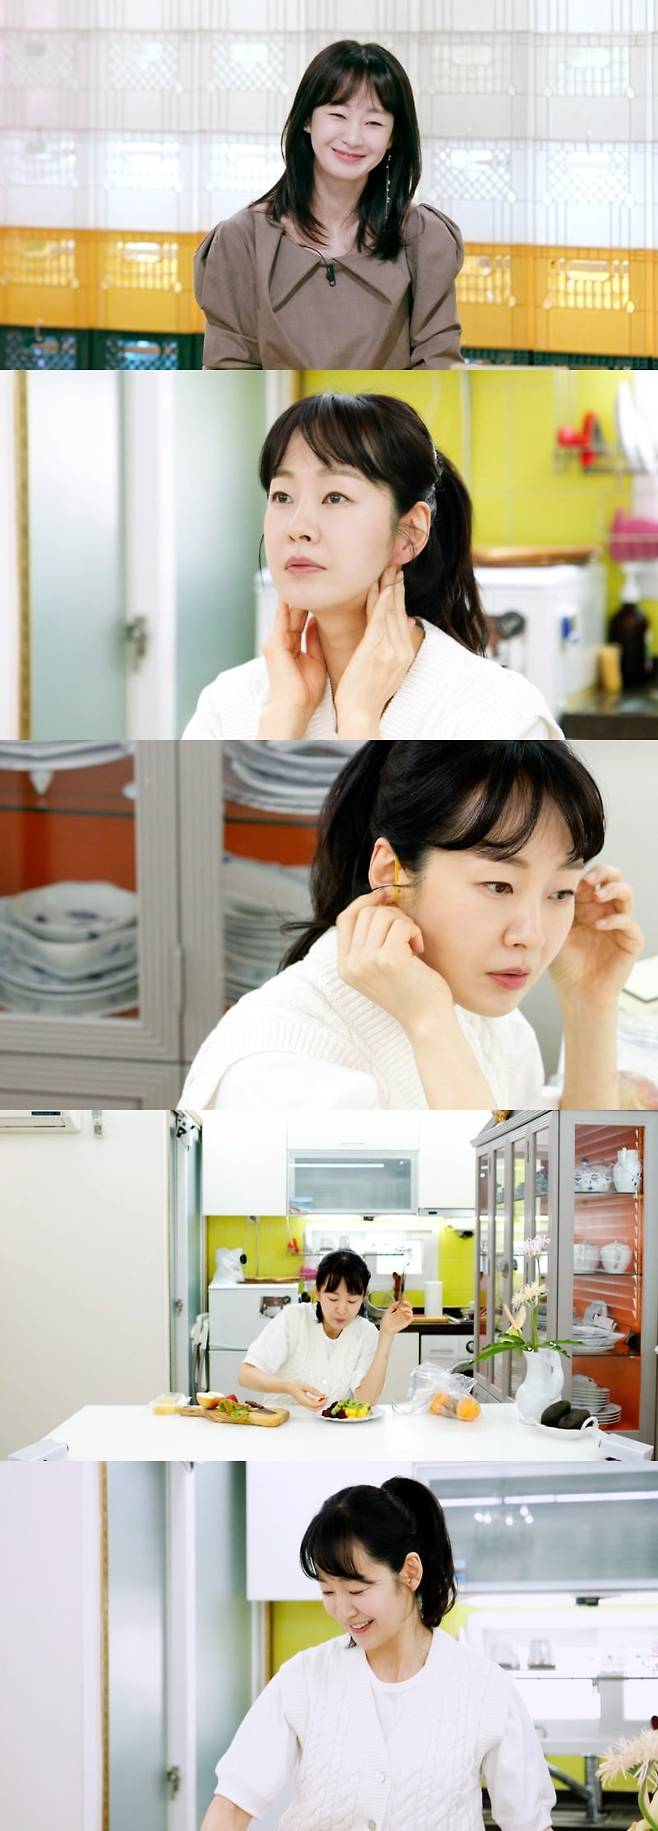 Beauty Myung Se-bin is back.On September 1, KBS2 entertainment  ⁇  Stars Top Recipe at Fun-Staurant  ⁇  (Stars Top Recipe at Fun-Staurant  ⁇ ) will return to chef Myung Se-bin for a long time.Beauty Myung Se-bins fresh and lovely single life to one-person personalized dishes and recipes are all expected to be released.Myung Se-bin is enjoying a new heyday after the drama  ⁇  Doctor Cha Jeong-suk  ⁇ , which received the highest audience rating of 18.5%.As soon as I met Myung Se-bin at the recent  ⁇  Stars Top Recipe at Fun-Staurant  ⁇  Studio recording,  ⁇  Stars Top Recipe at Fun-Staurant  ⁇  The family members did not really change  ⁇   ⁇   ⁇   ⁇ ,  ⁇   ⁇  The skin is so good  ⁇  I poured out admiration.The special MC star looks directly at the frozen Beauty, and the MC boom manager says that he wants to tell you that he is the first Nitrogen Packing Beauty in the entertainment industry after the clean Beauty and the frozen Beauty.Myung Se-bin said, Thank you. I try to keep it.In the VCR of Myung Se-bin, daily morning routines that protect the beauty of Myung Se-bin were revealed.Myung Se-bin cut small fruit of various colors such as blueberry, raspberry, pineapple, kiwi from the morning and put all kinds of fruit in one hand as if eating nutrients.In the first Fruit Eating Show, Myung Se-bin said, I think it is synergistic in flavor, texture and taste to eat at once. I heard that it is good to eat various fruit with color.Myung Se-bins second morning routine, which was released after a handful of Fruit eating shows, was the management of a rubber band. Myung Se-bin walked the yellow rubber band tight enough to fold his ears.When everyone was curious, Myung Se-bin focused his attention on explaining the reason for managing the rubber band, and he did not forget to massage the lymph around his face with his hands.The morning routine of Myung Se-bin, famous for her brilliant beauty, exploded the attention of the Stars Top Recipe at Fun-Staurant family, and everyone wondered about her diet.Myung Se-bin has recently released recipes for eating pufferfish, including those that are missing recently.Stars Top Recipe at Fun-Staurant will be broadcasted at 8:30 pm on September 1st.